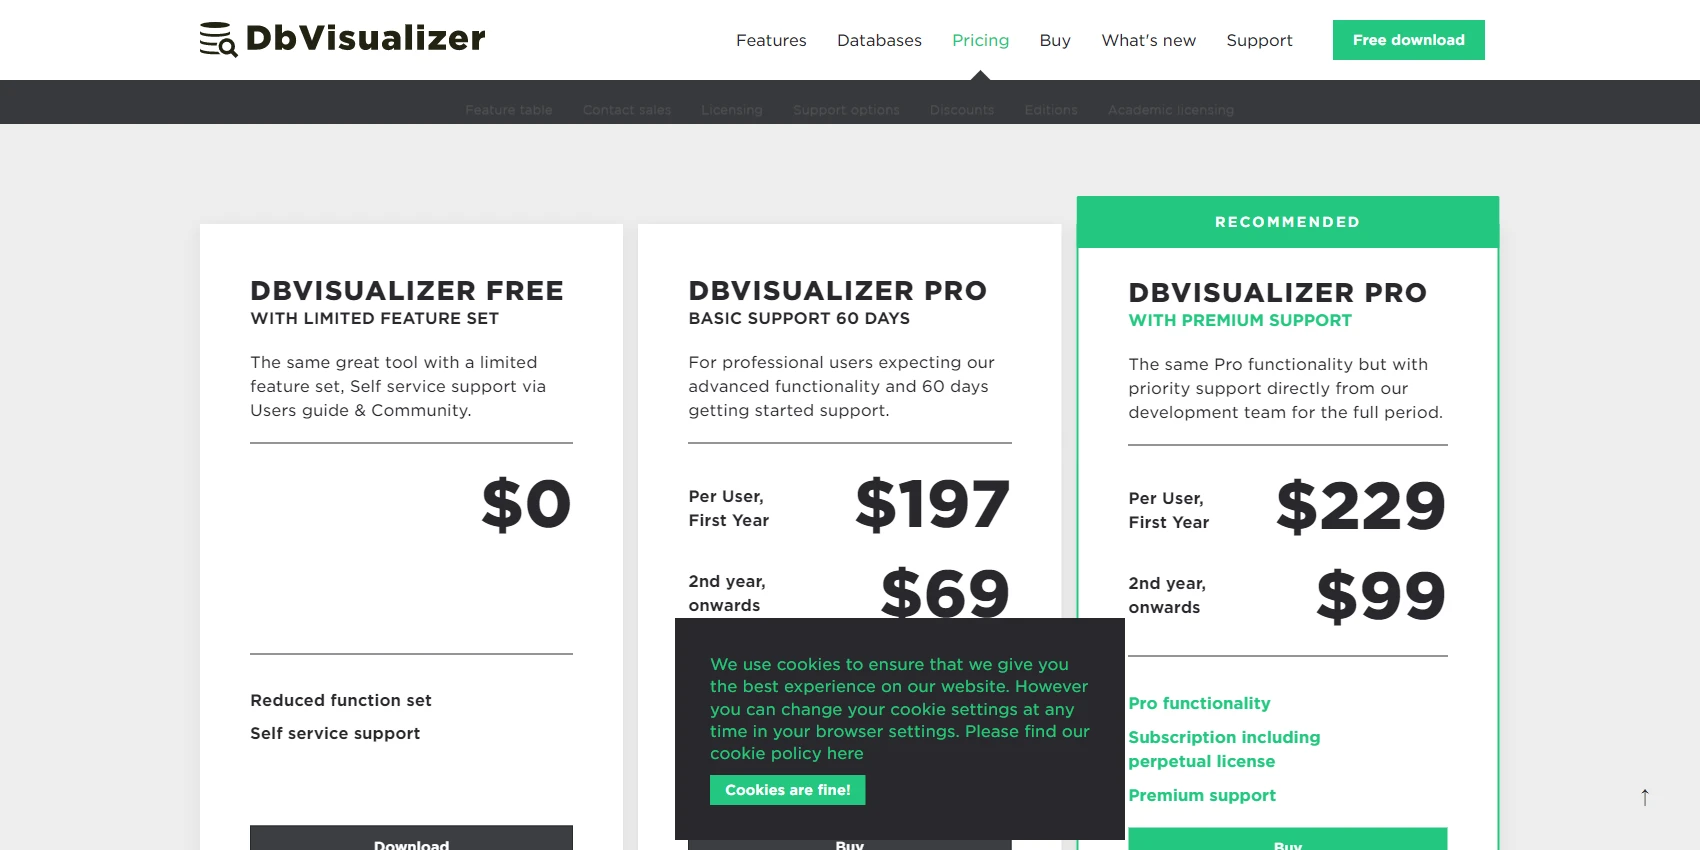 7. DbVisualizer Pricing